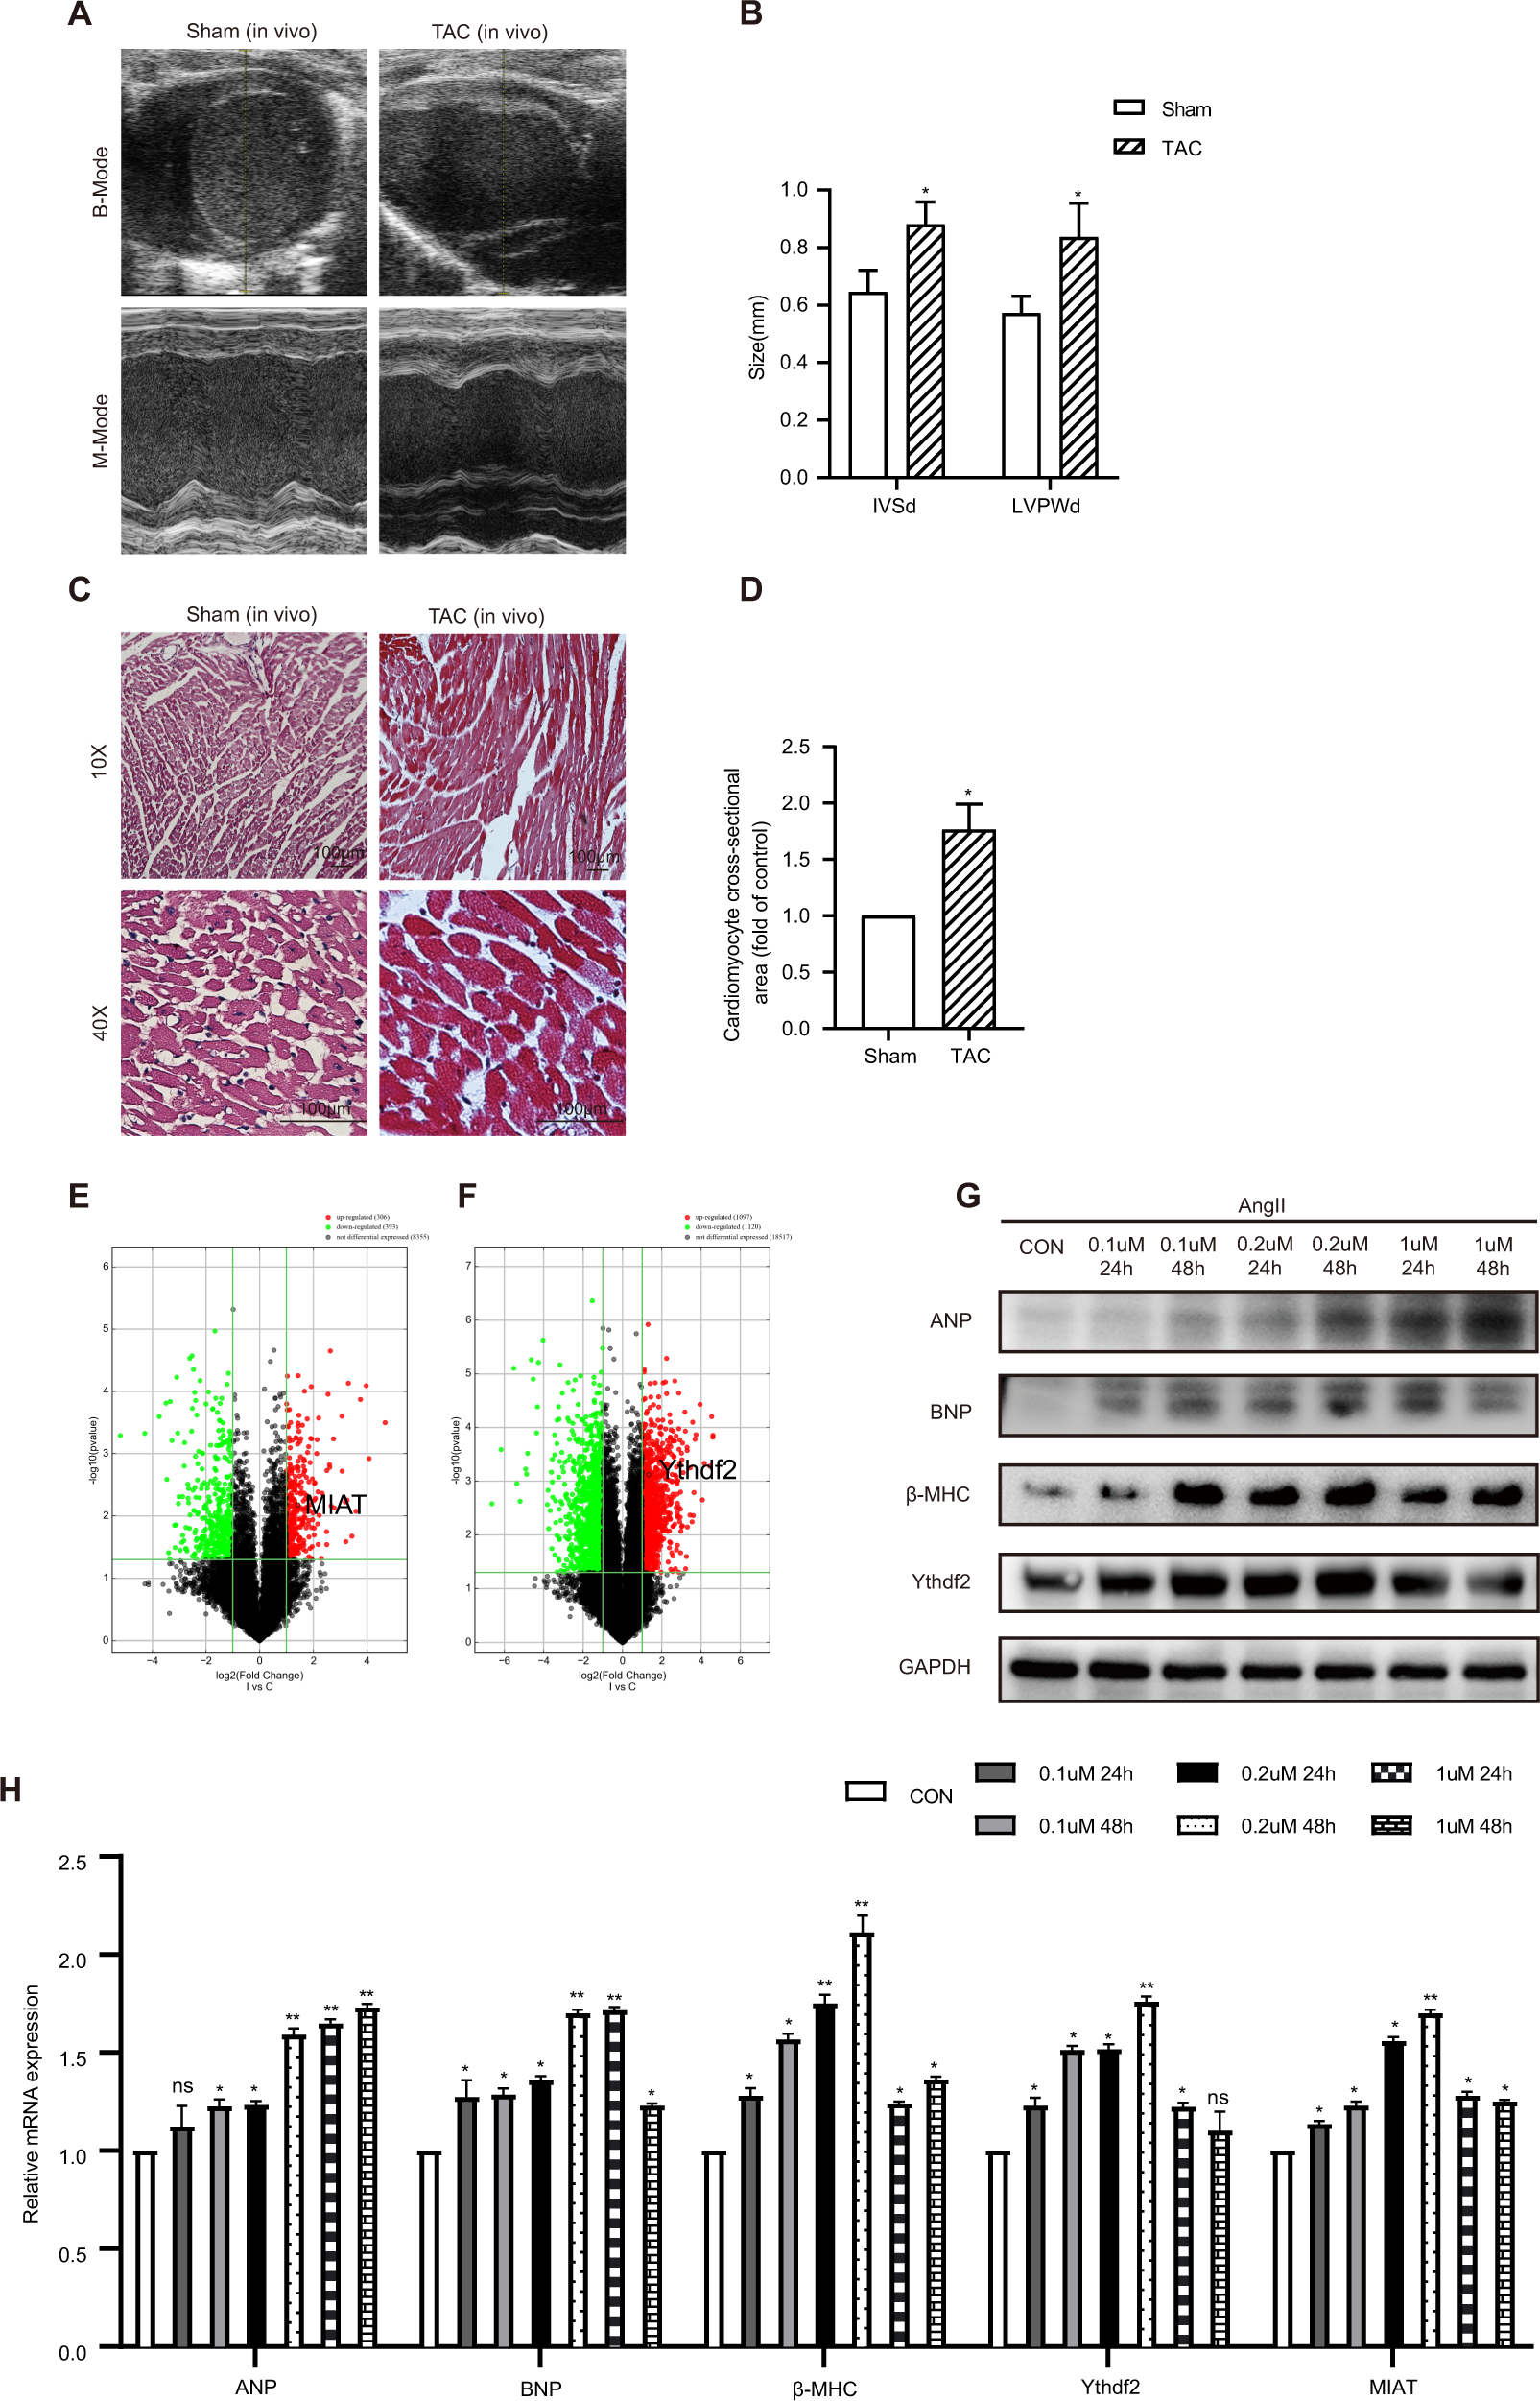 The lncRNA MIAT regulates CPT-1a mediated cardiac hypertrophy through m6A  RNA methylation reading protein Ythdf2 | Cell Death Discovery